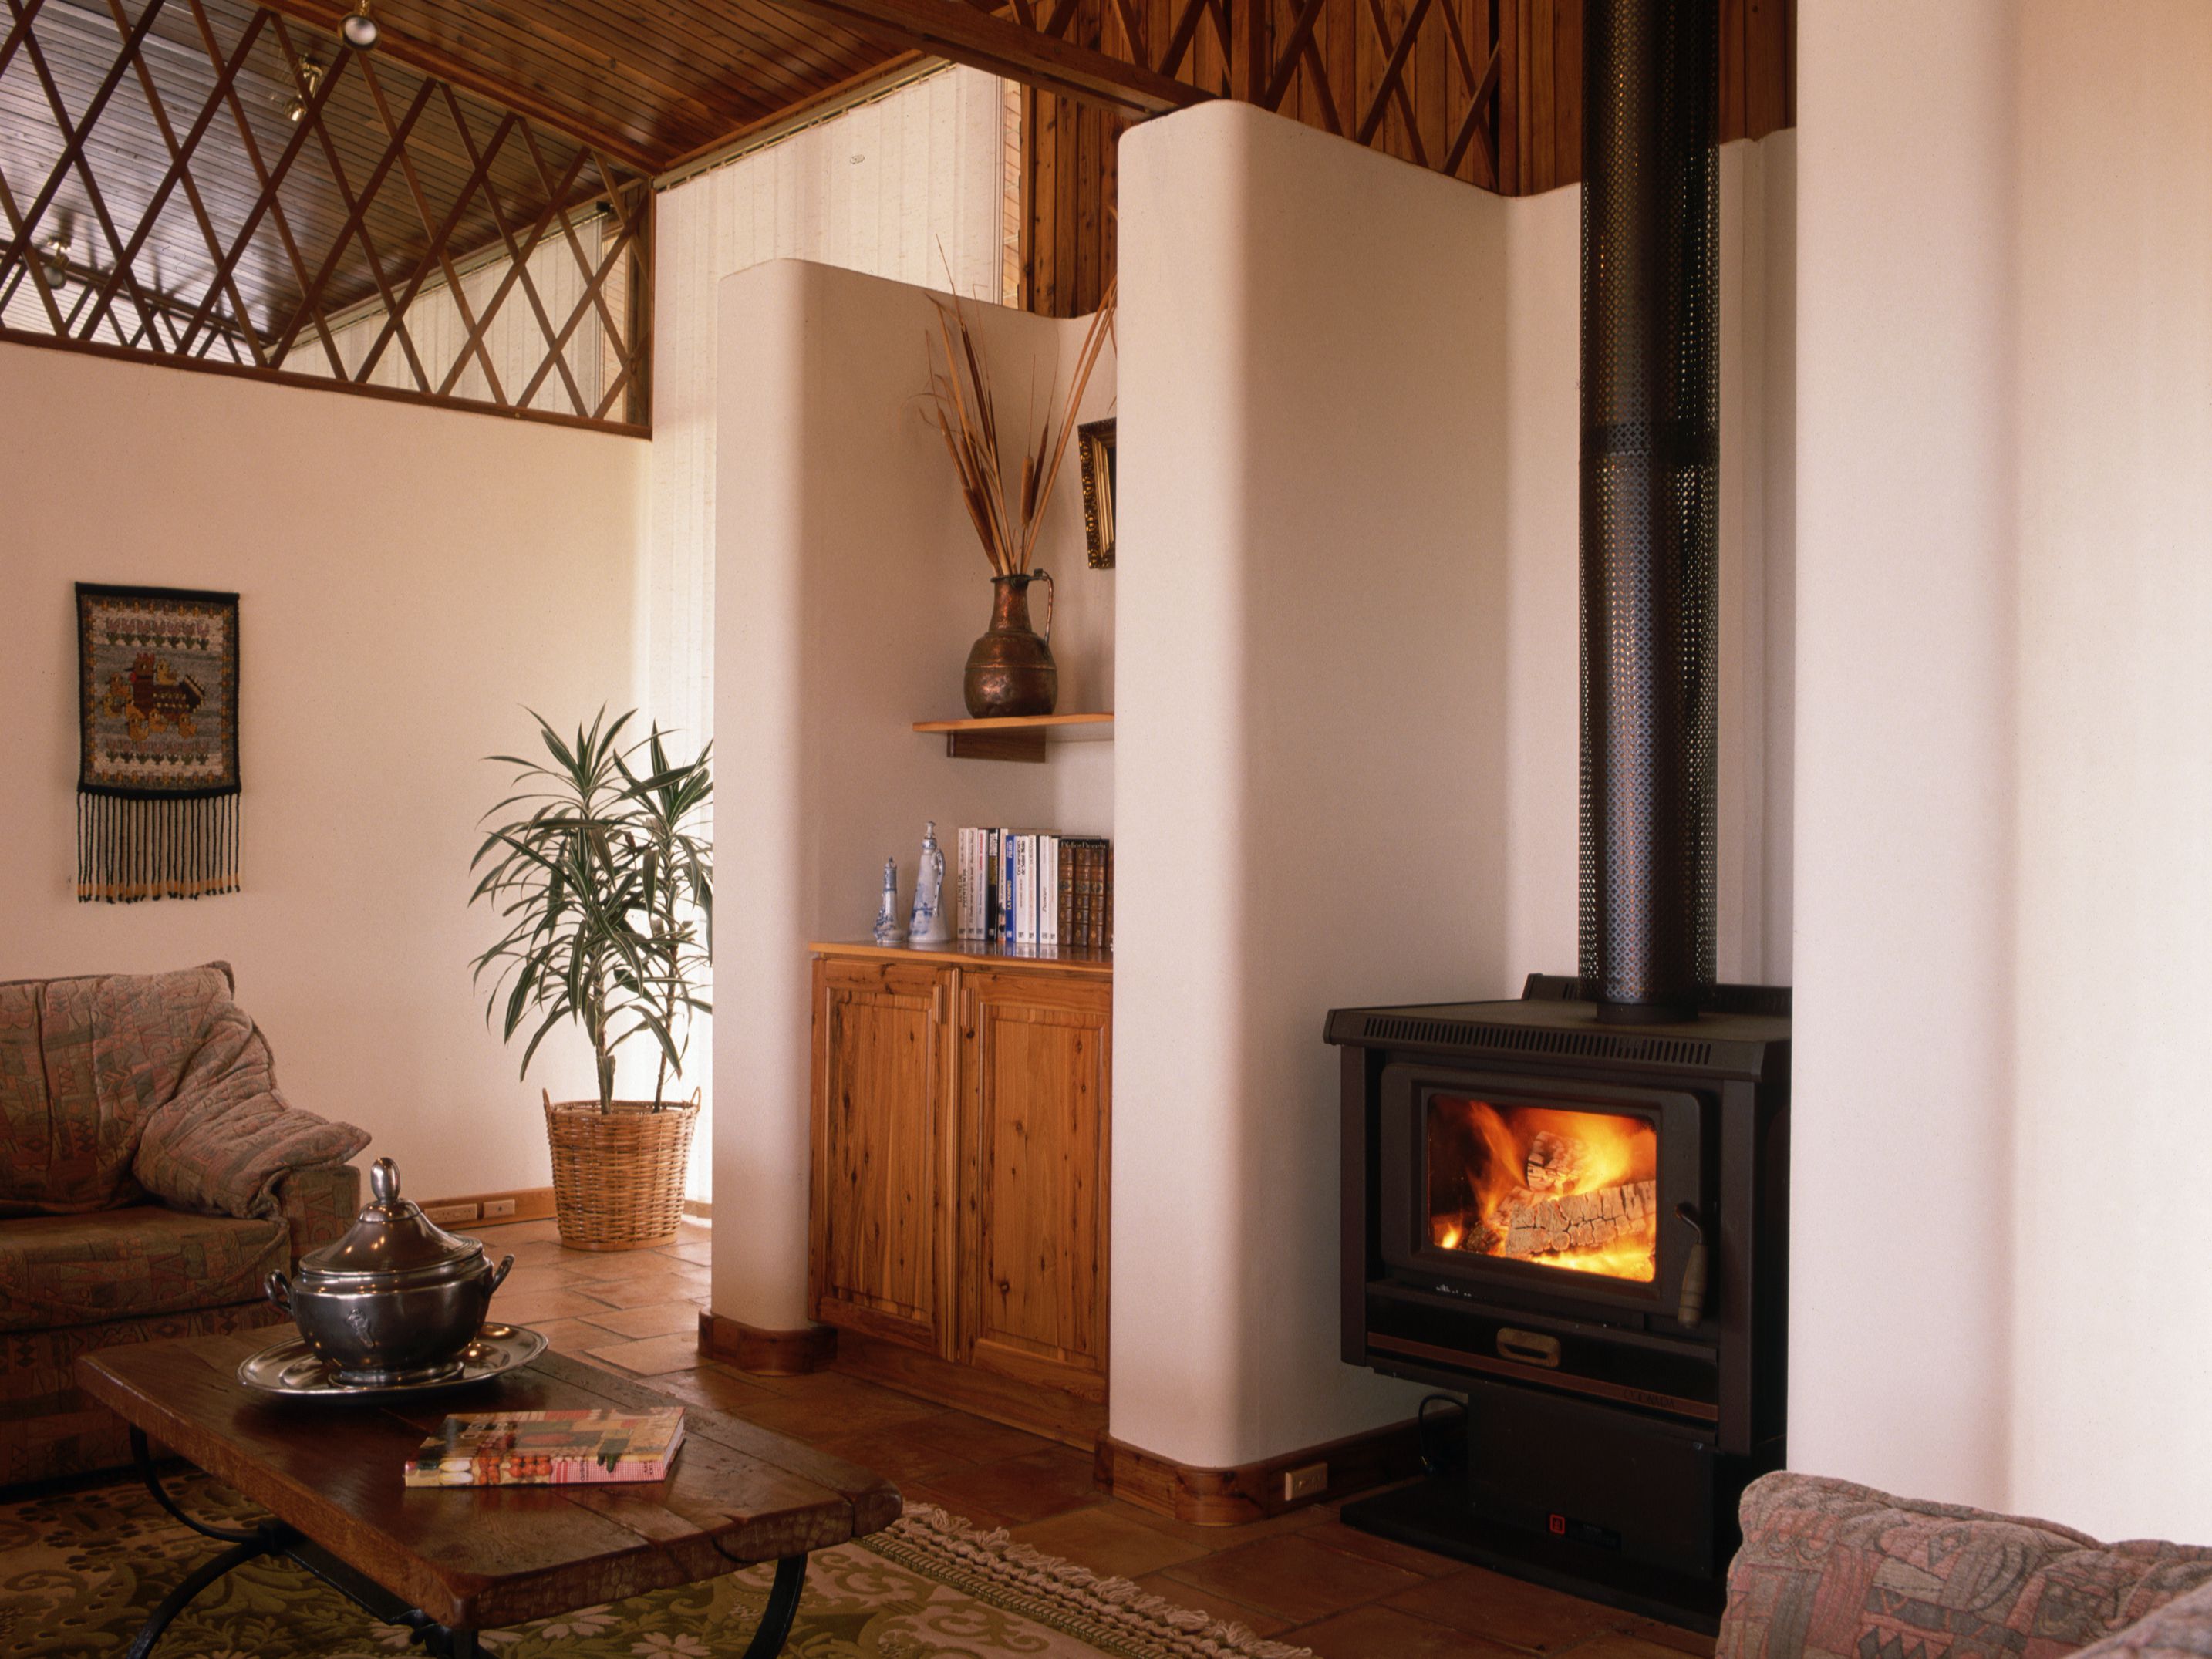 Quadra Fire Fireplace Insert Unique Guide to Buying A Pellet Stove